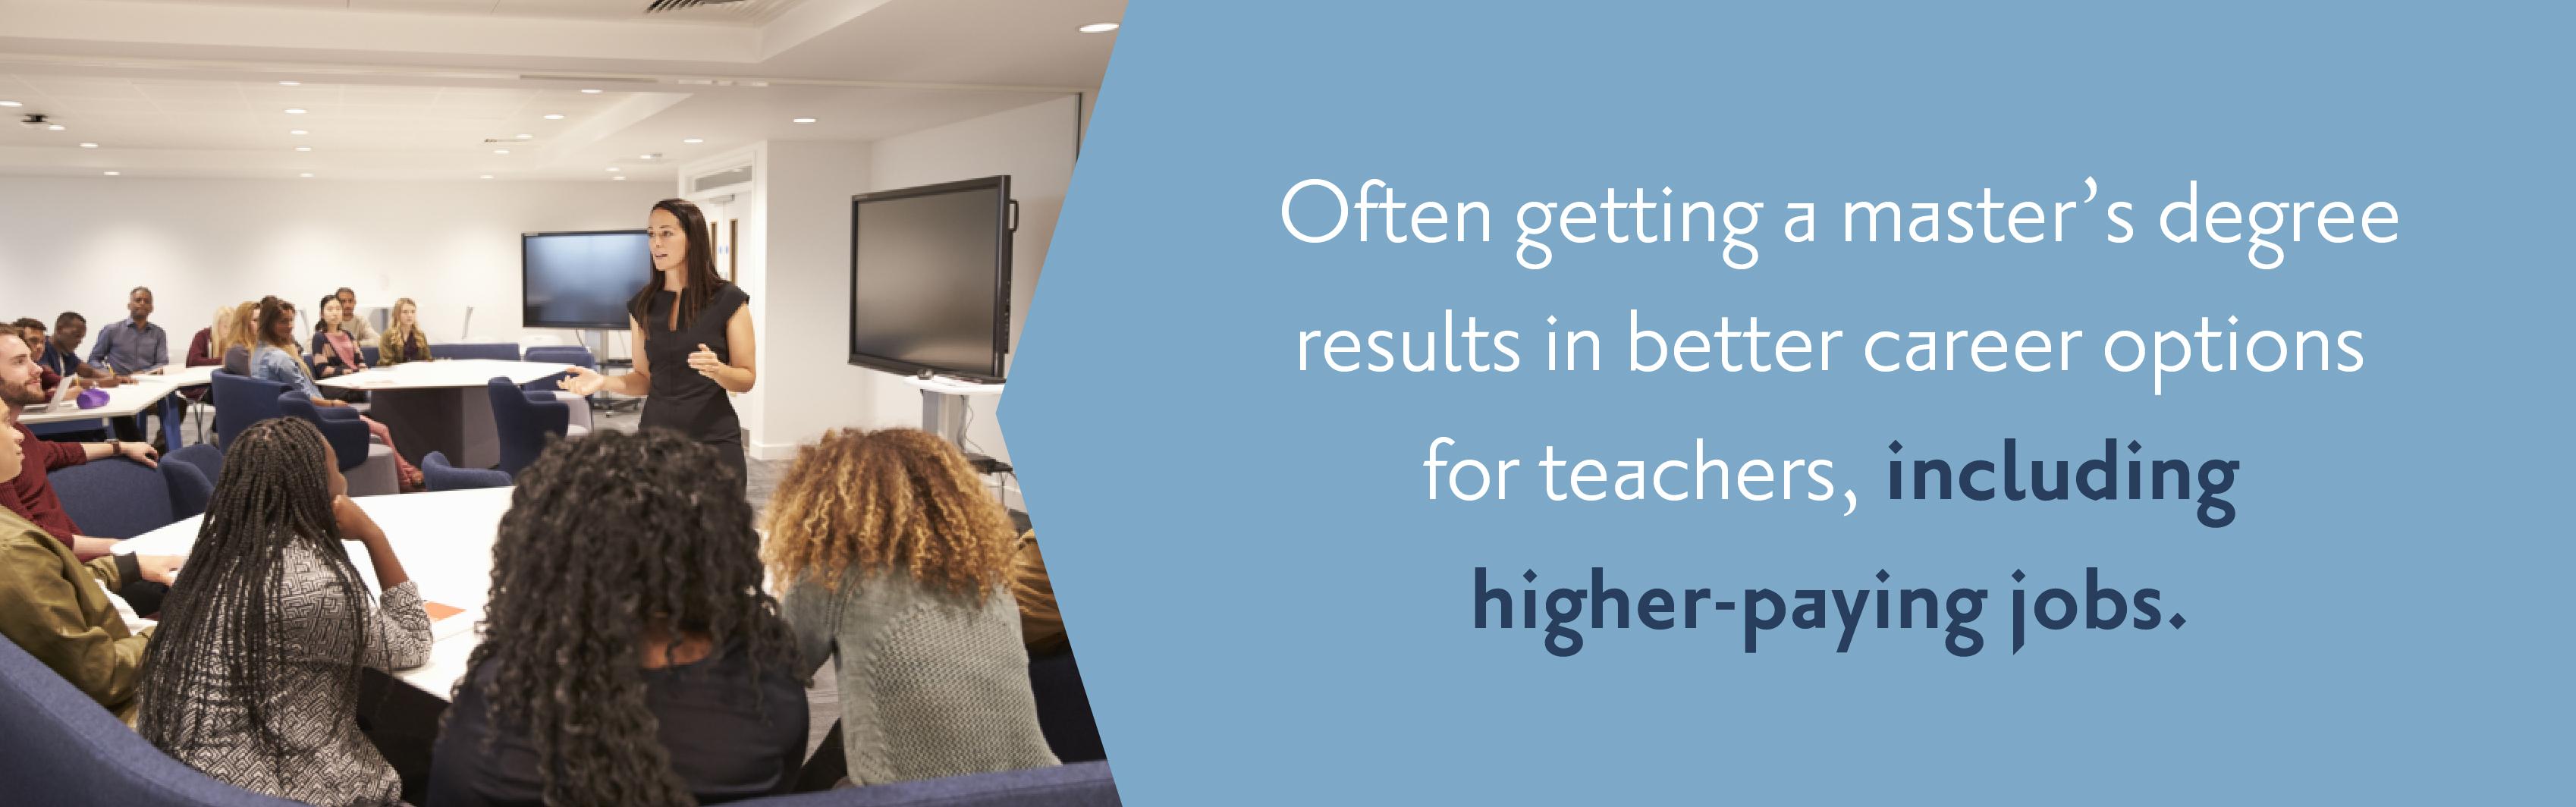 Getting a master's degree results in better career options for teachers.